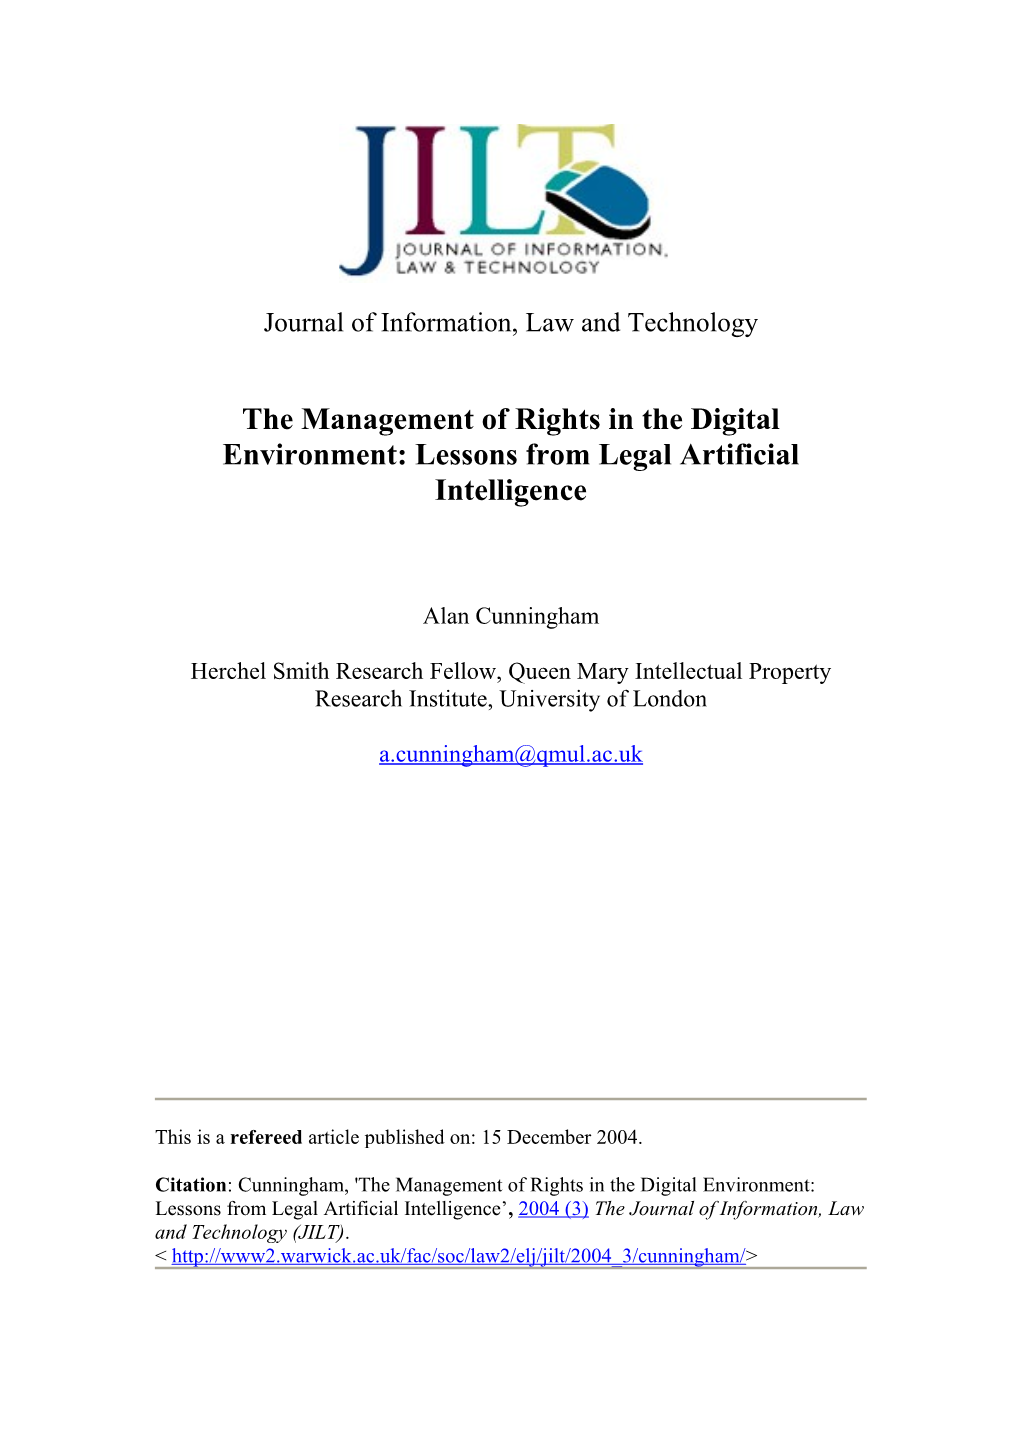 The Management of Rights in the Digital Environment: Lessons from Legal Artificial Intelligence